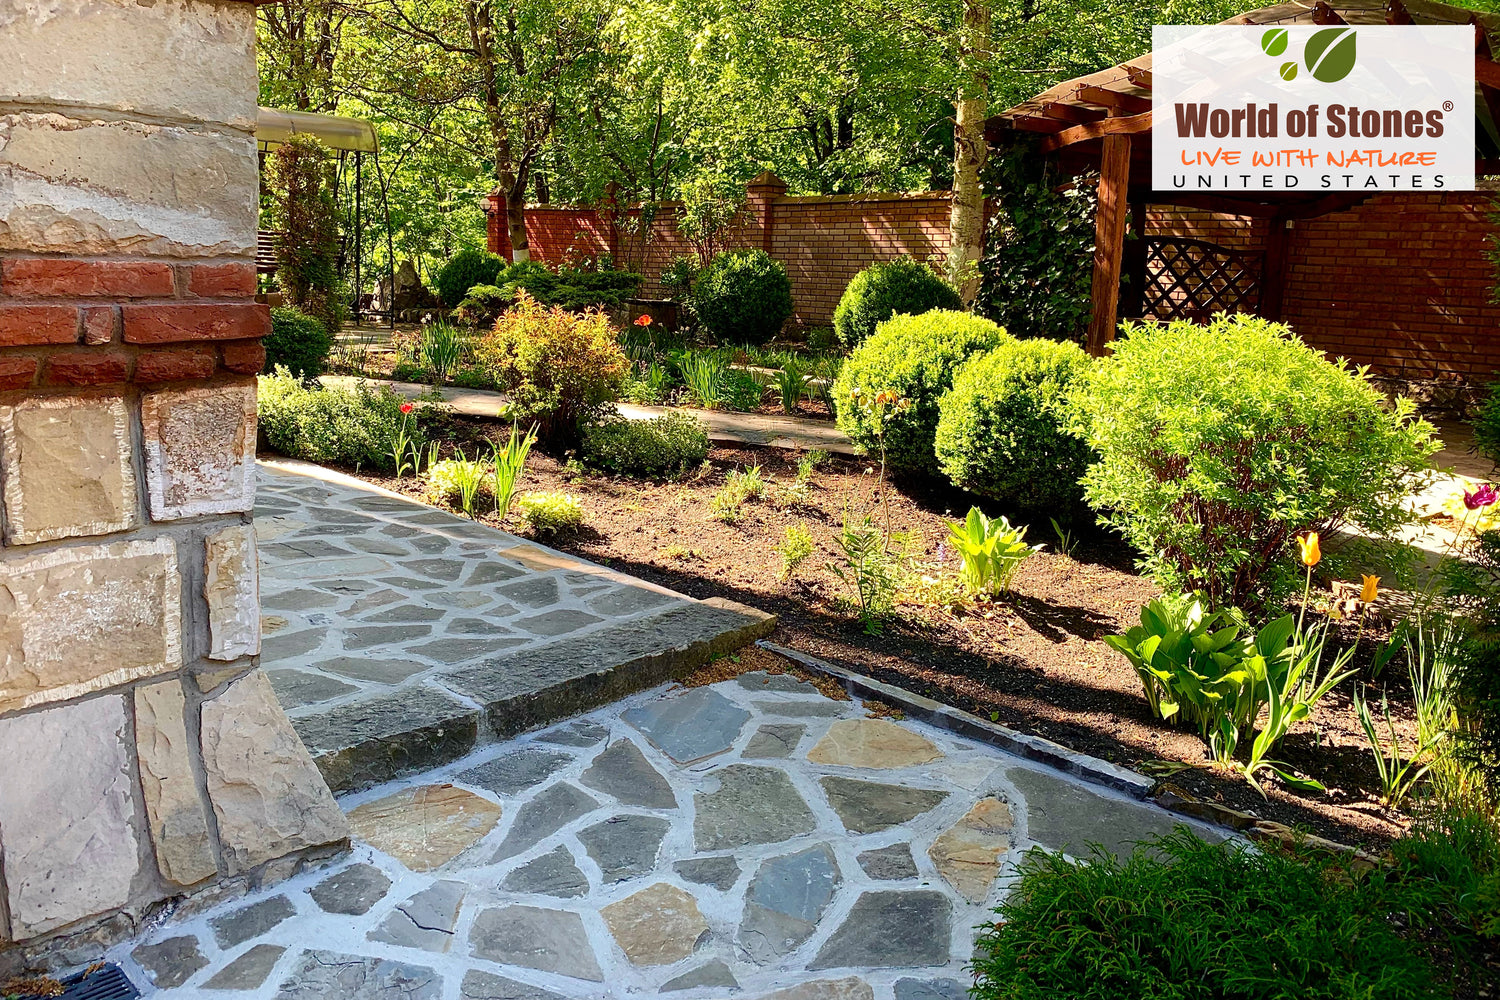 Bluestone Pavers – Why Popular Choice for Outdoor Paving?